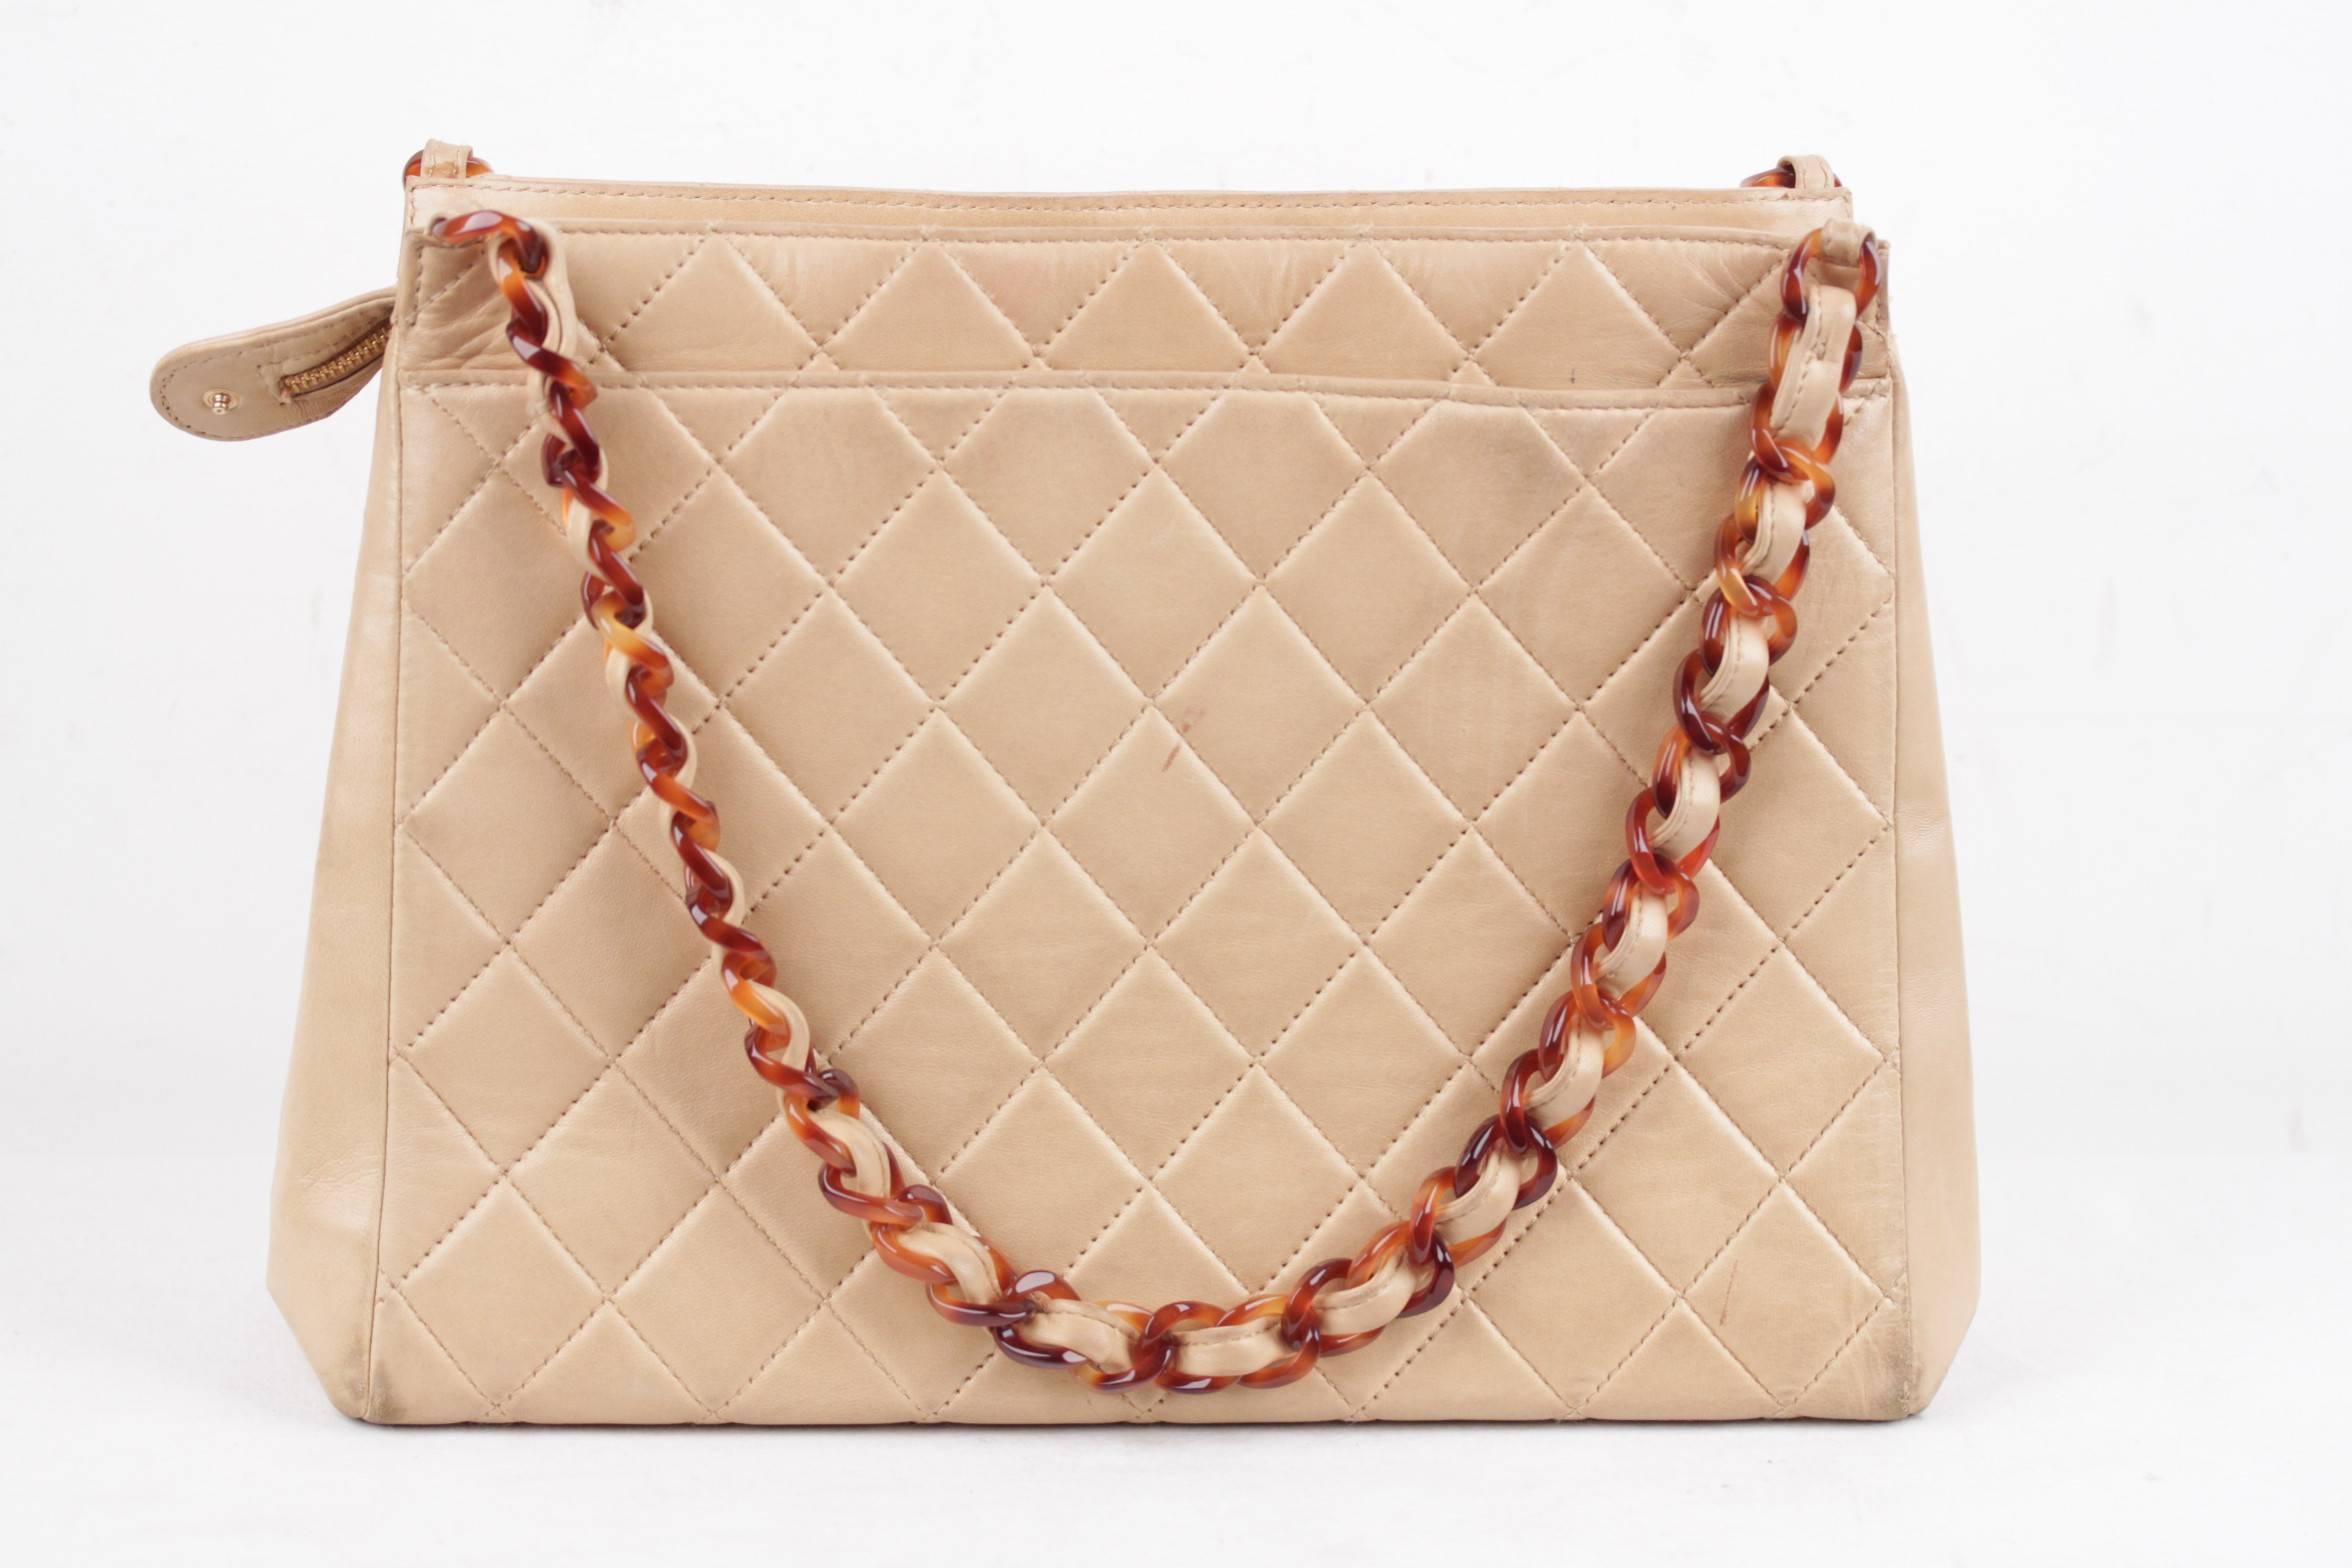  - CHANEL Vintage Tote in Tan Quilted Leather

- Tortoise chain link top handles threaded with leather

- Upper zipper closure

- Tortoise CHANEL zipper pull

- 1 open section on the front and 1 on the back

- Leather interior

- 1 side zip pocket &